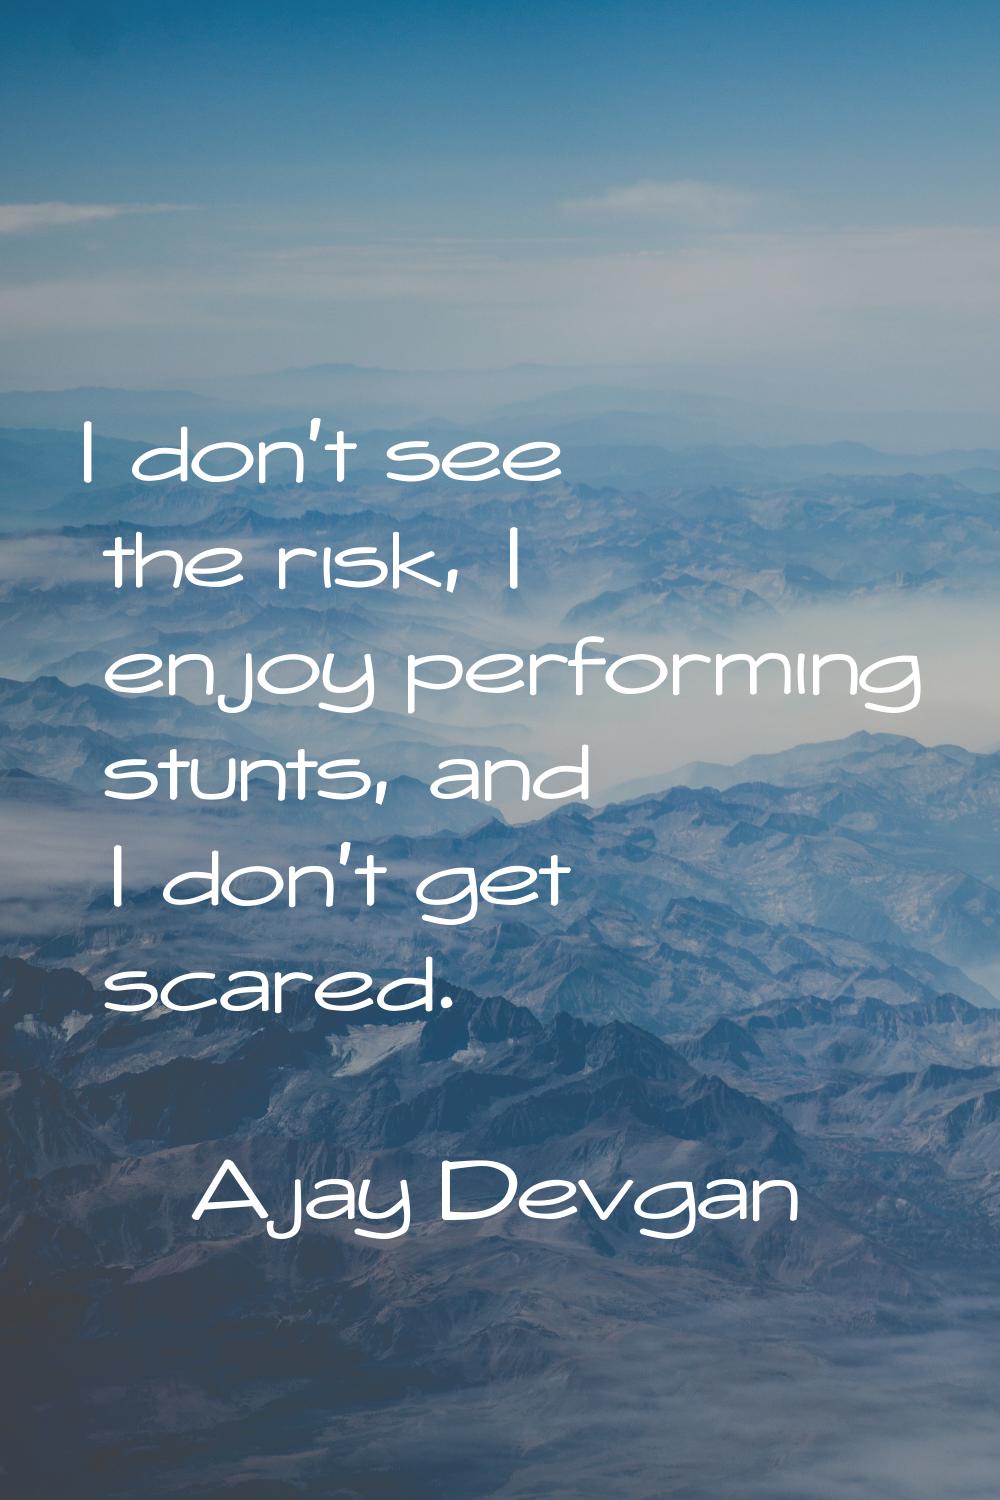 I don't see the risk, I enjoy performing stunts, and I don't get scared.